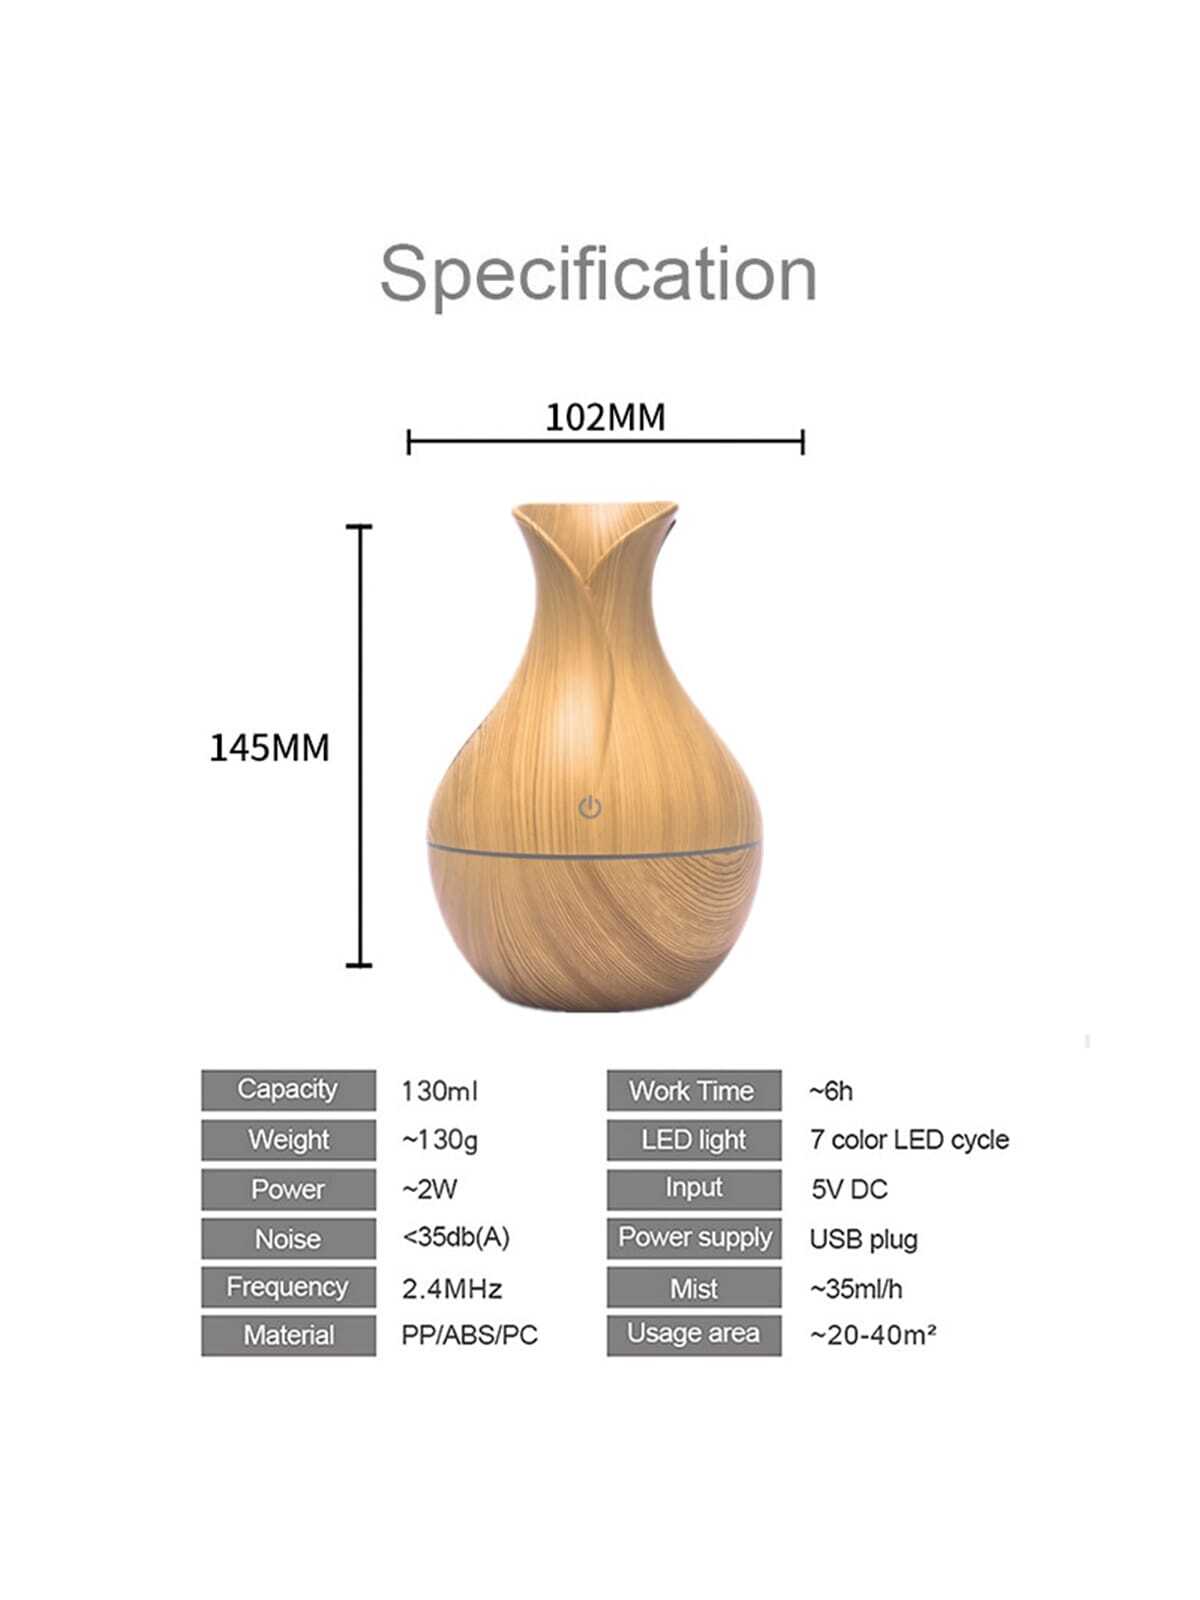 1pc Usb Wood Grain Flower Vase Shaped Humidifier With 7-color Led Light & Aroma Diffuser Function For Home, Office, Car Decoration-light wood grain-5